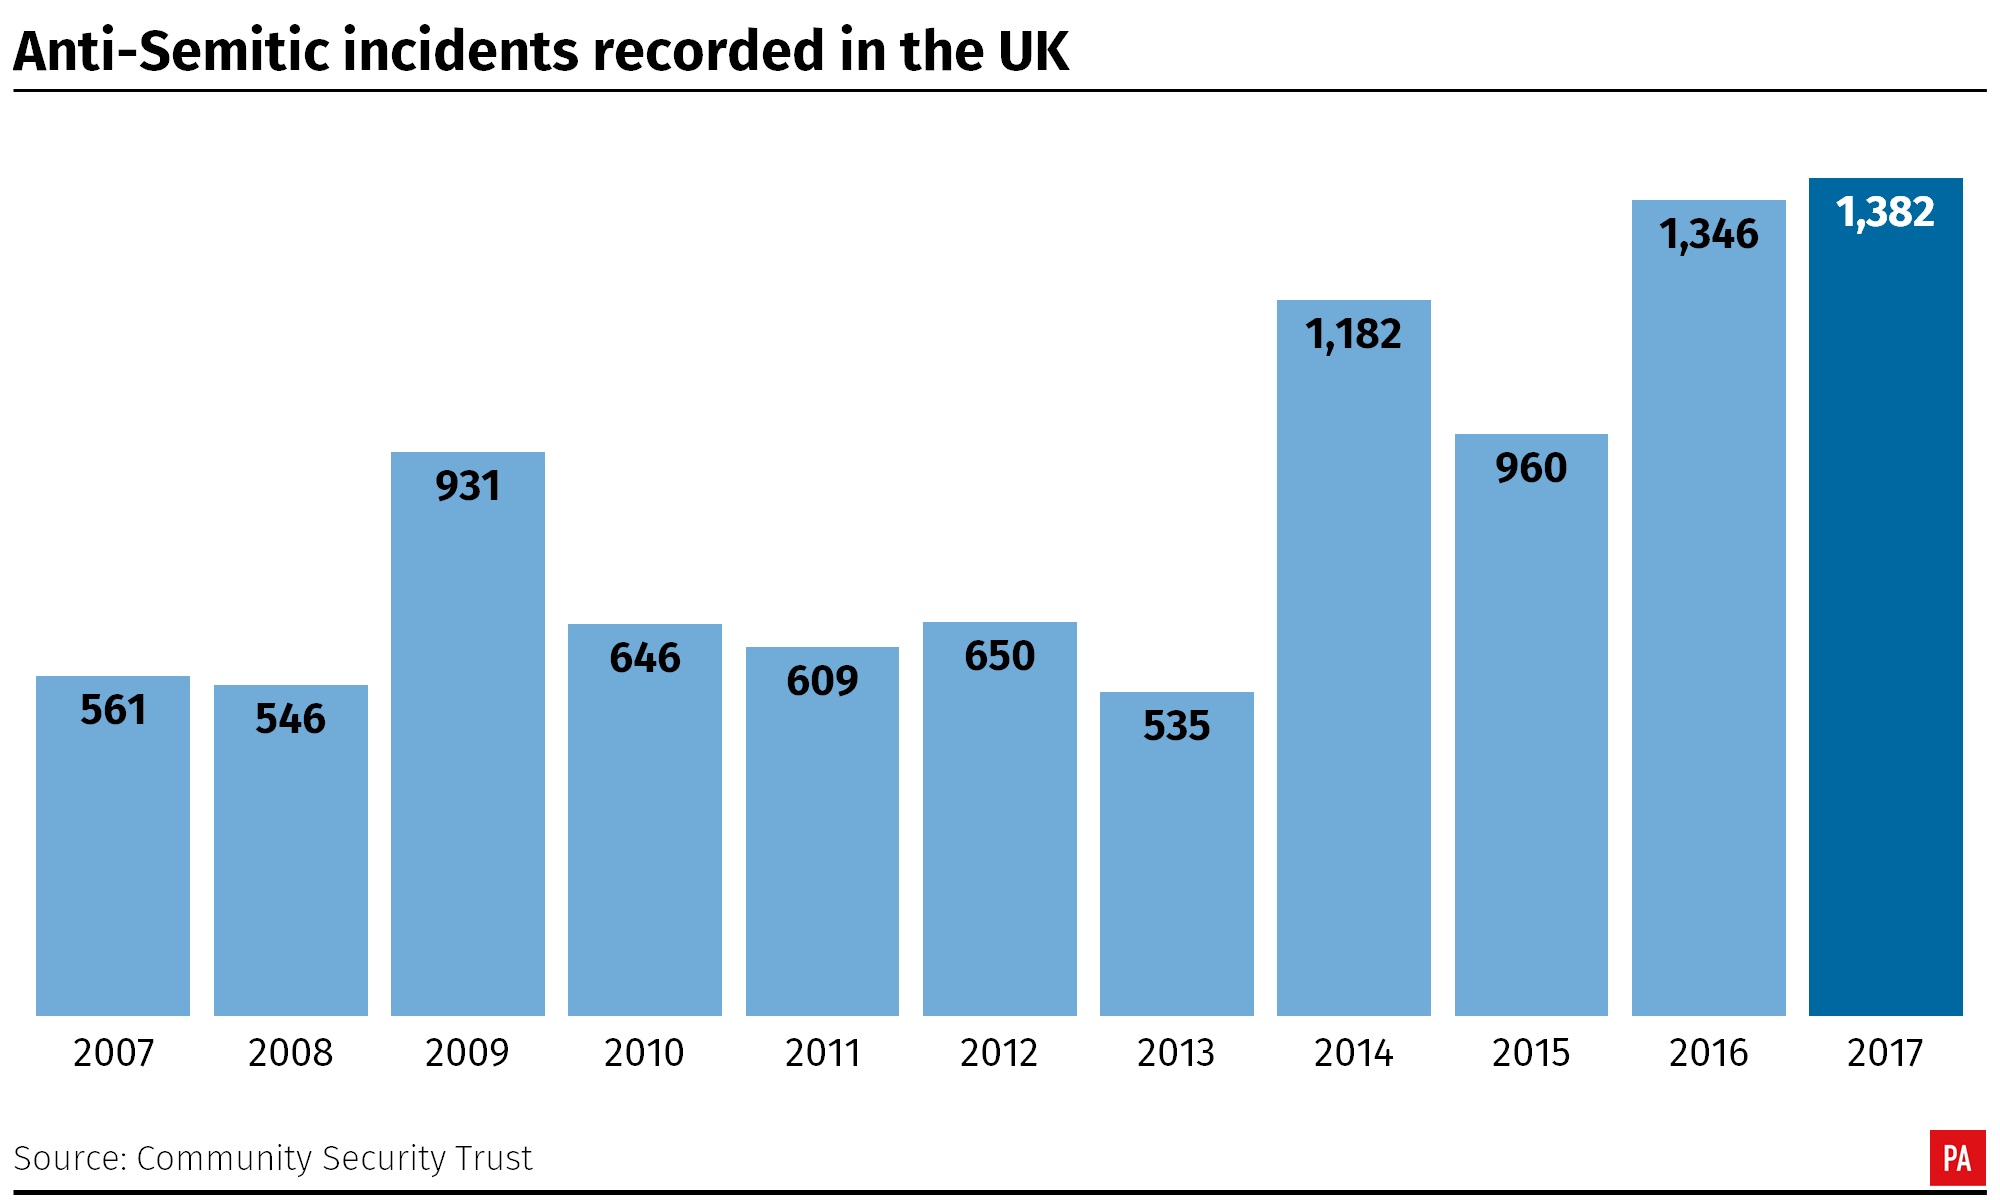 Anti-Semitic incidents recorded in the UK